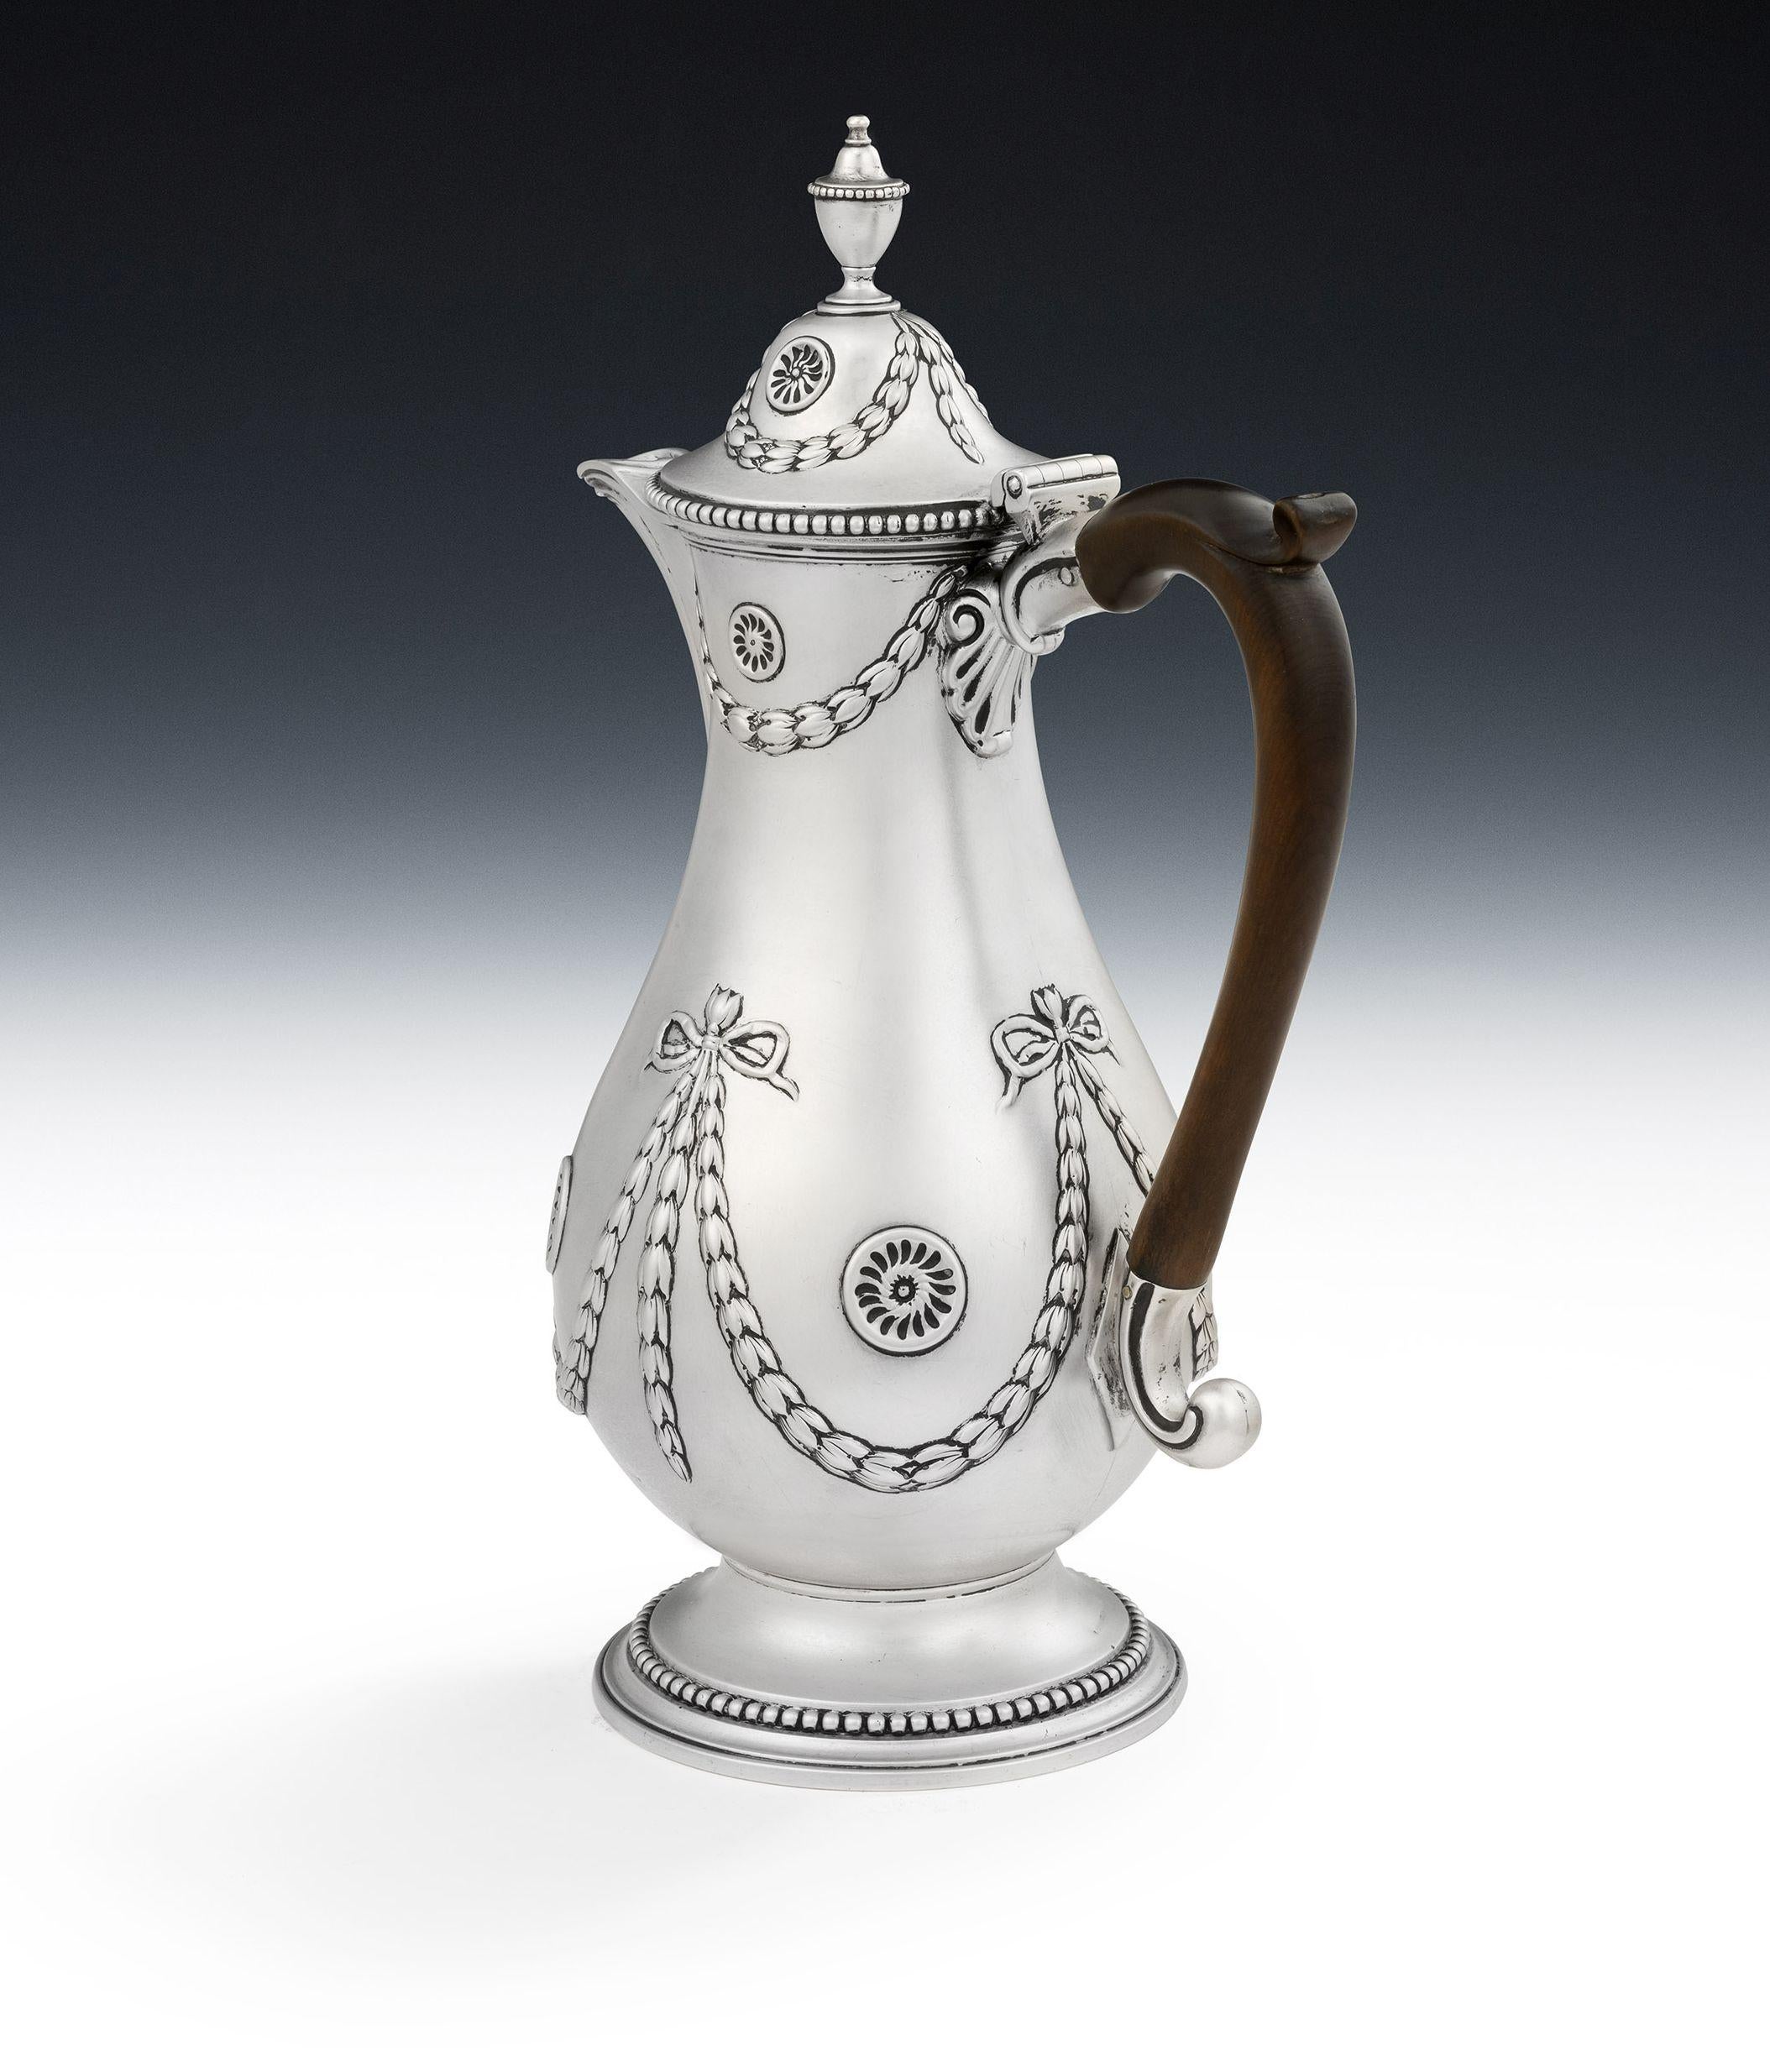 A very fine & unusual George III Neo Classical Wine/Water Jug made in London in 1775 by Daniel Smith & Robert Sharp.

The Jug stands on an applied foot which is decorated with bold beading.  The baluster shaped main body is beautifully decorated